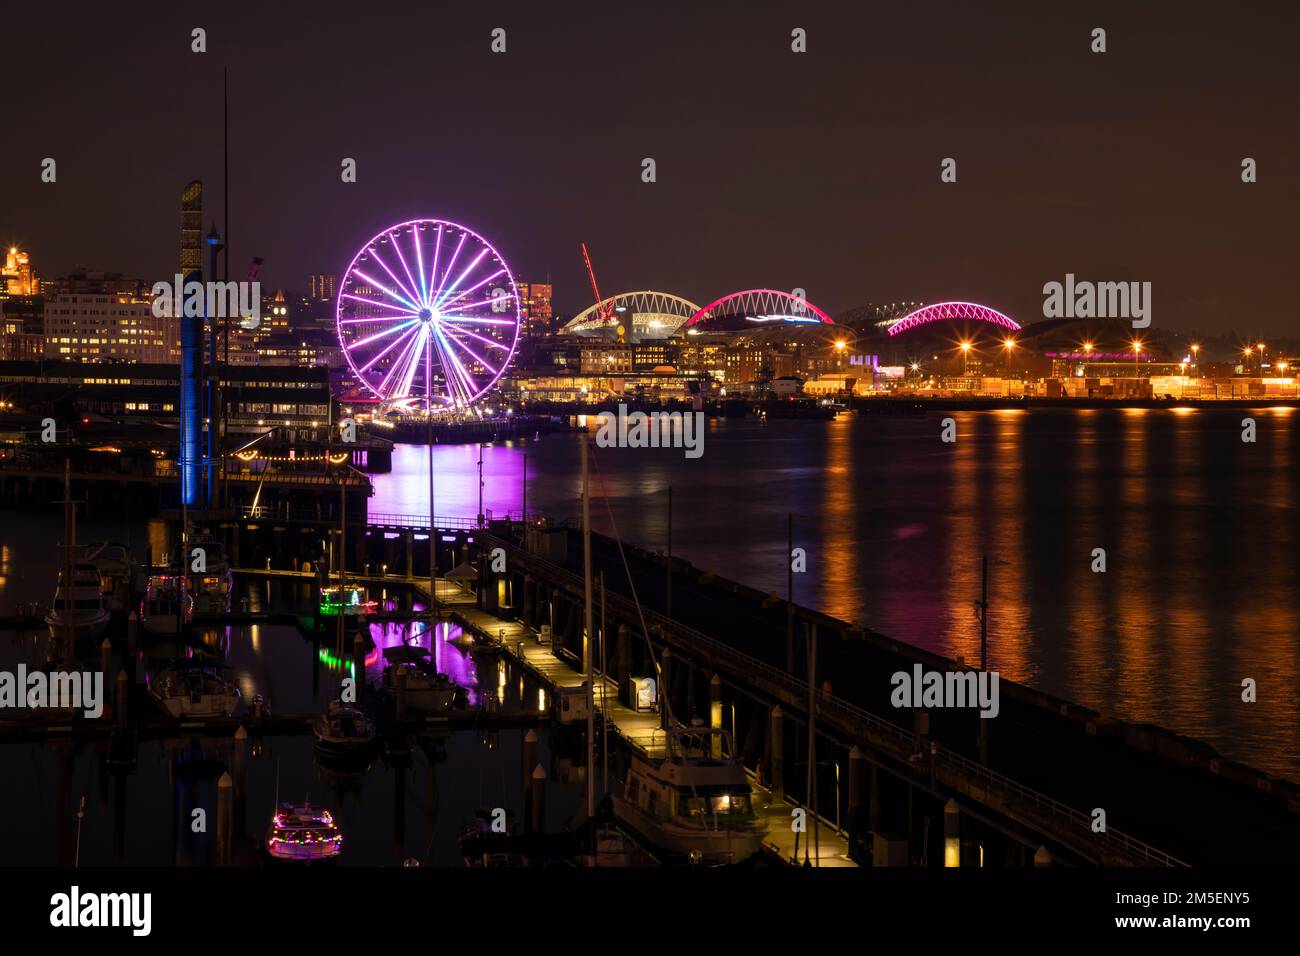 WA22888-00...WASHINGTON - The Seattle waterfront with  the Bell Harbor Marina, the Seattle Great Wheel., the stadiums and the Port of Seattle. Stock Photo